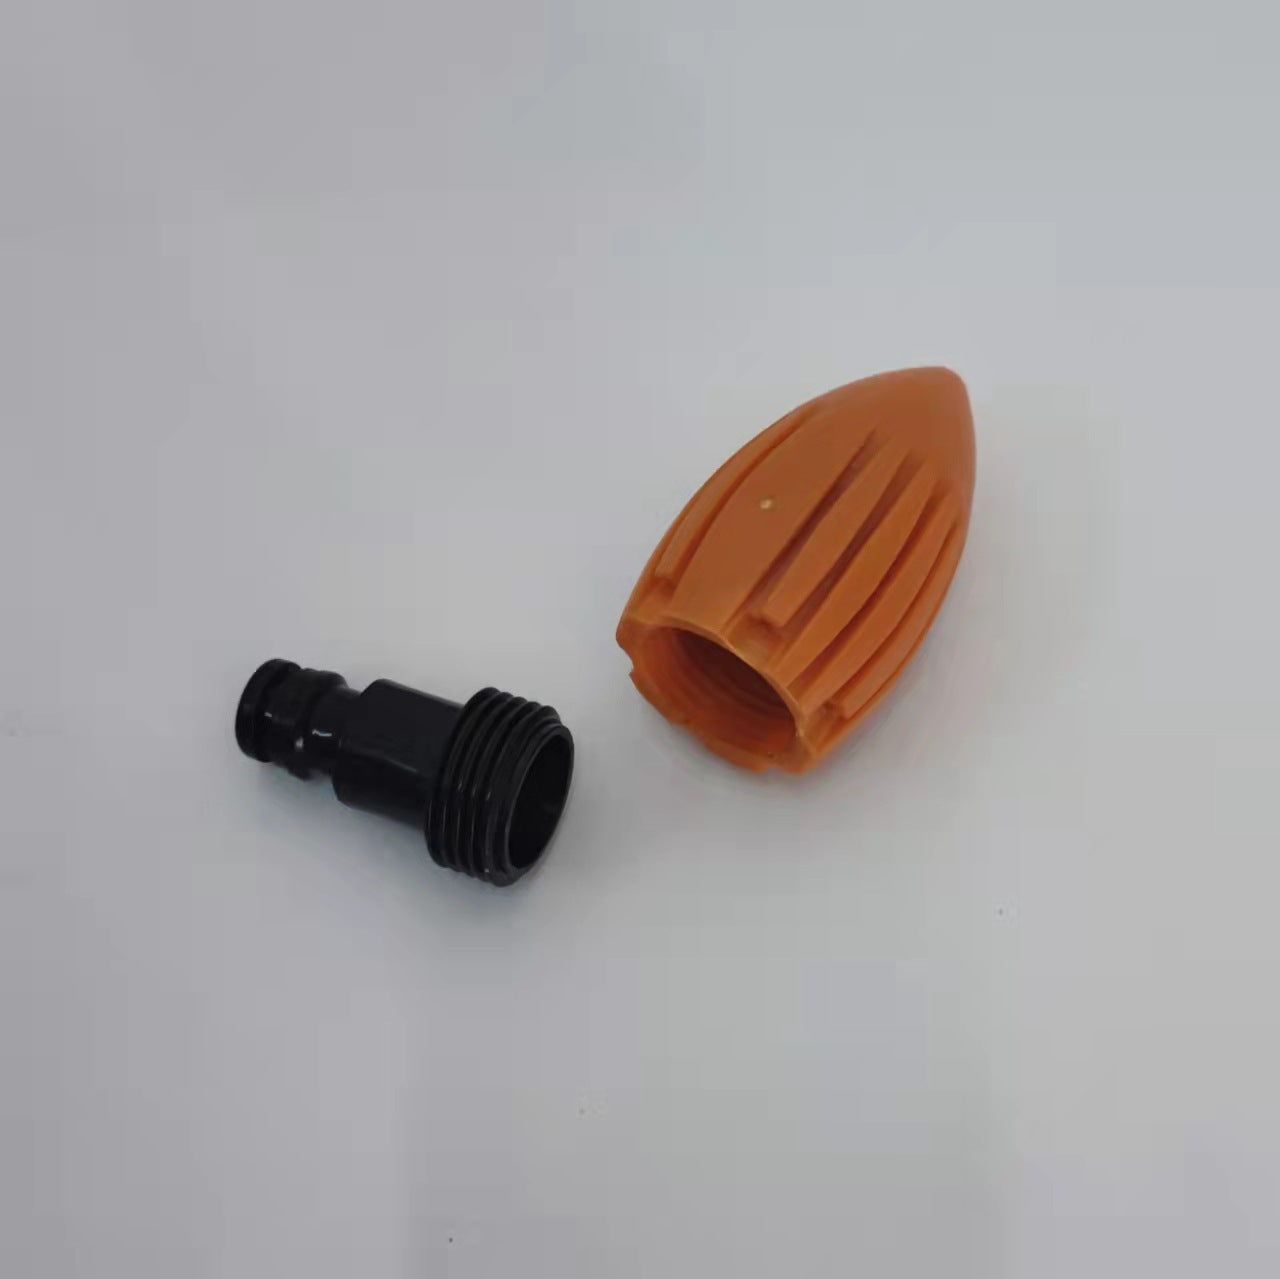 Water Rocket Gutter Cleaning Tool Flushing Cleaning Machine Sewer Flusher